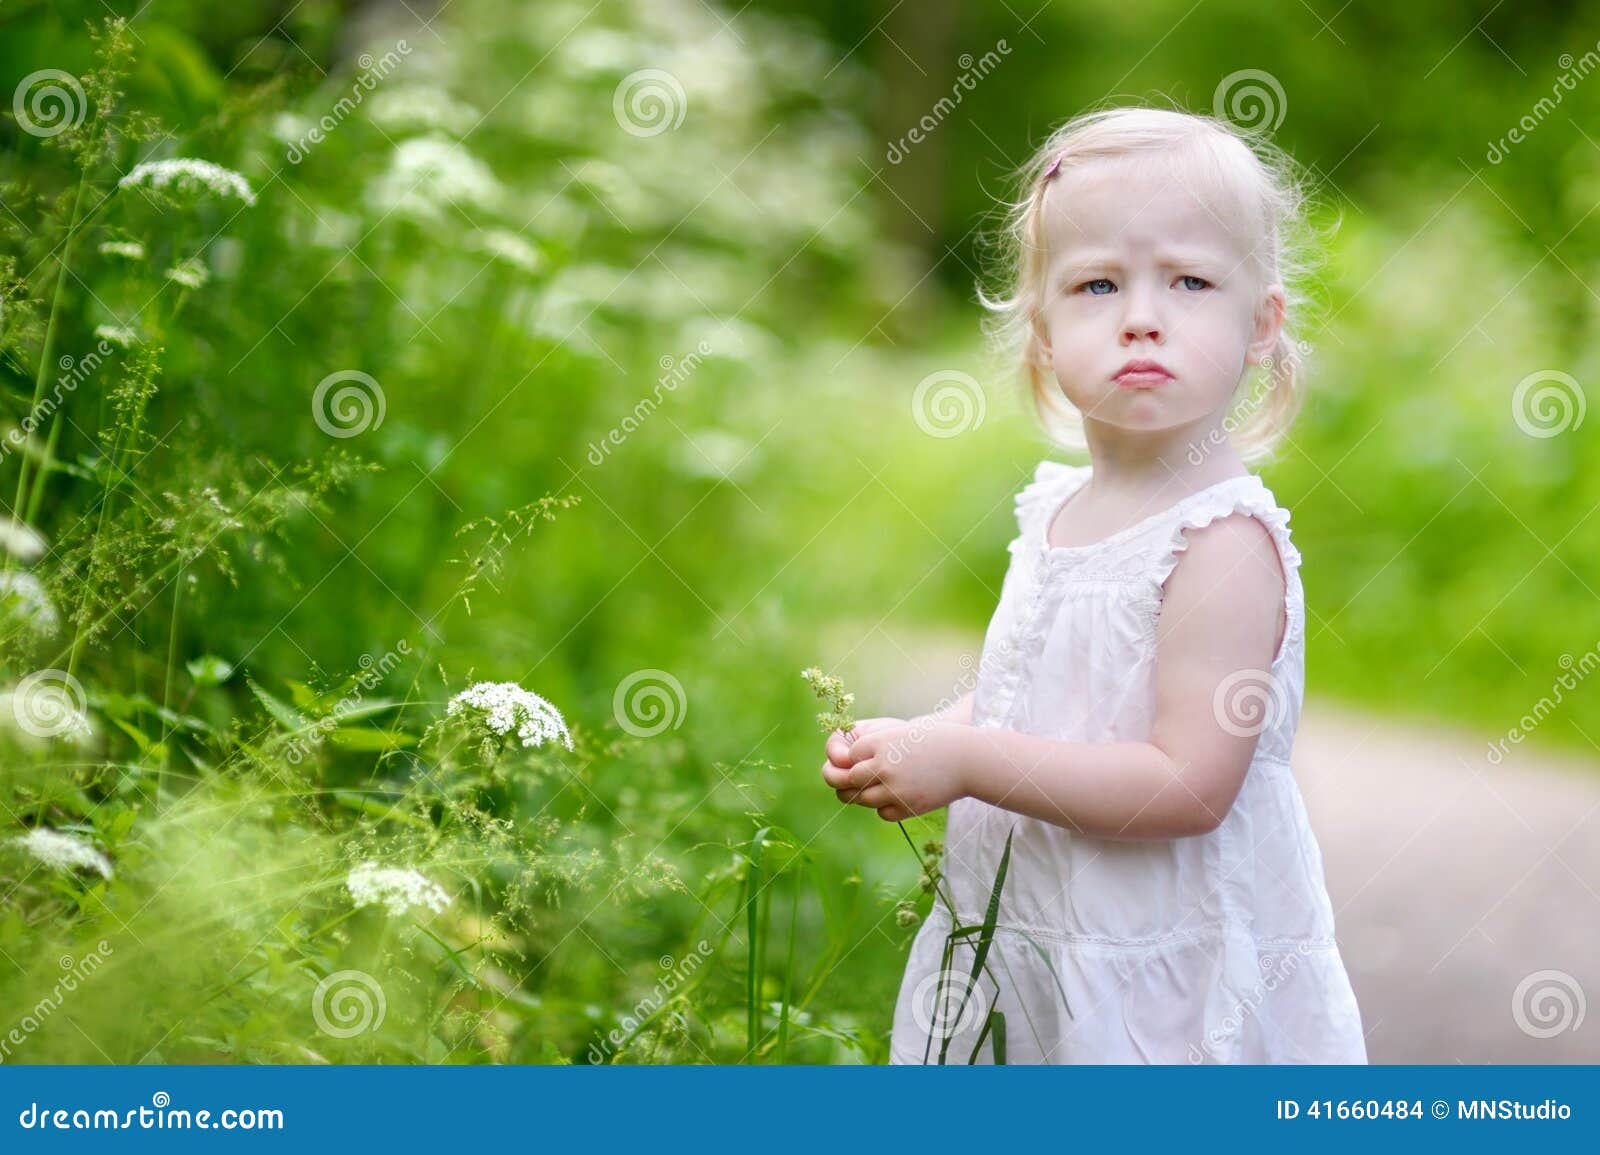 Portrait of a Very Angry Little Girl Stock Photo - Image of look ...